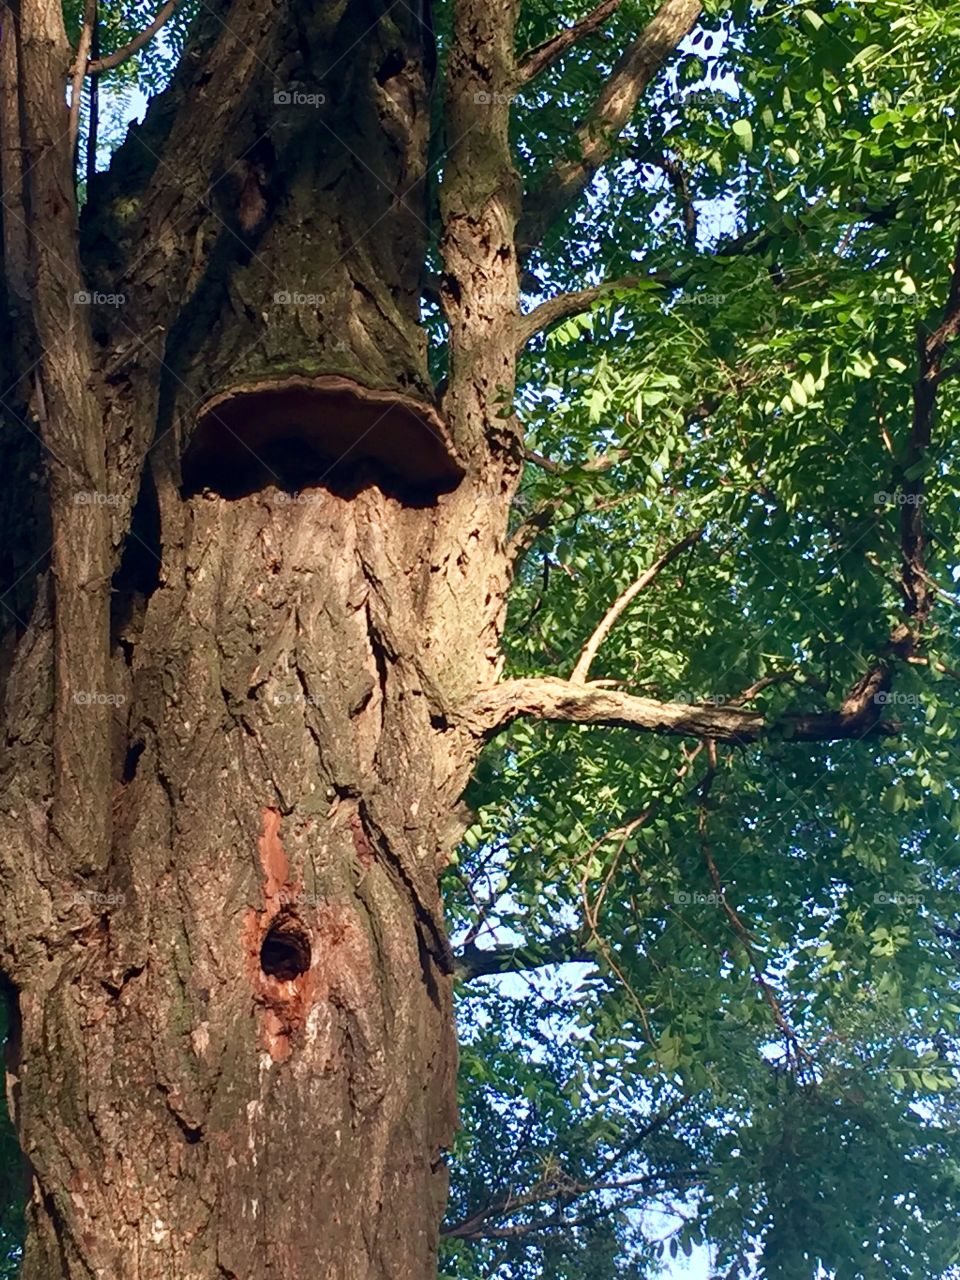 A Red-Headed Woodpecker’s home in a large leafy tree, with lichen for an “awning” 